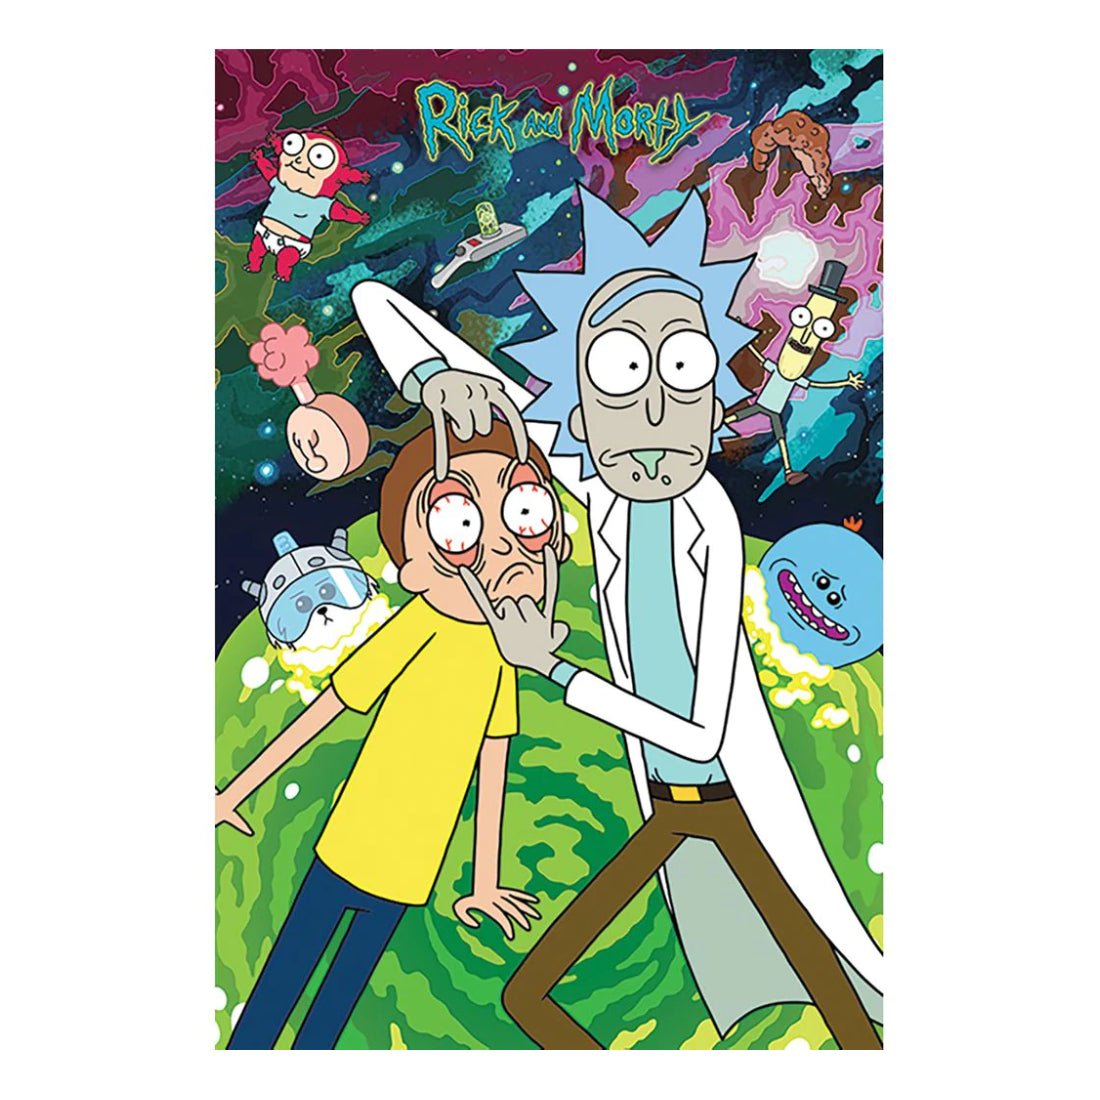 Rick And Morty - Watch Maxi Posters - أكسسوار - Store 974 | ستور ٩٧٤